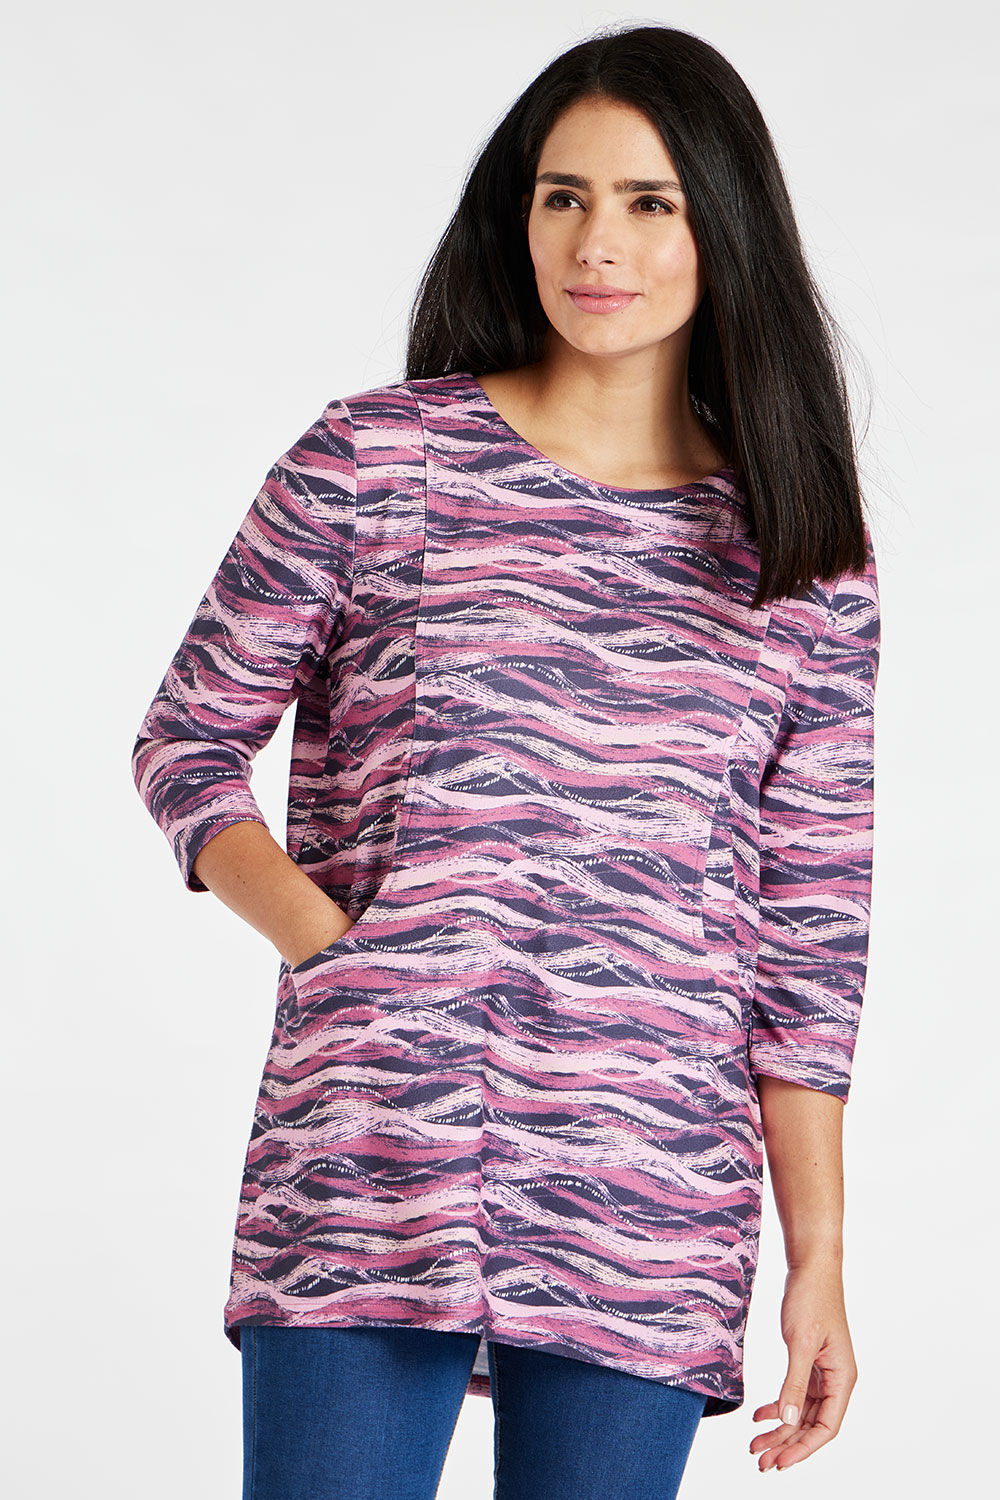 Bonmarche Women’s Pink Striped 3/4 Sleeve Wavy Print Soft Touch Tunic with Pocket Detail, Size: 14